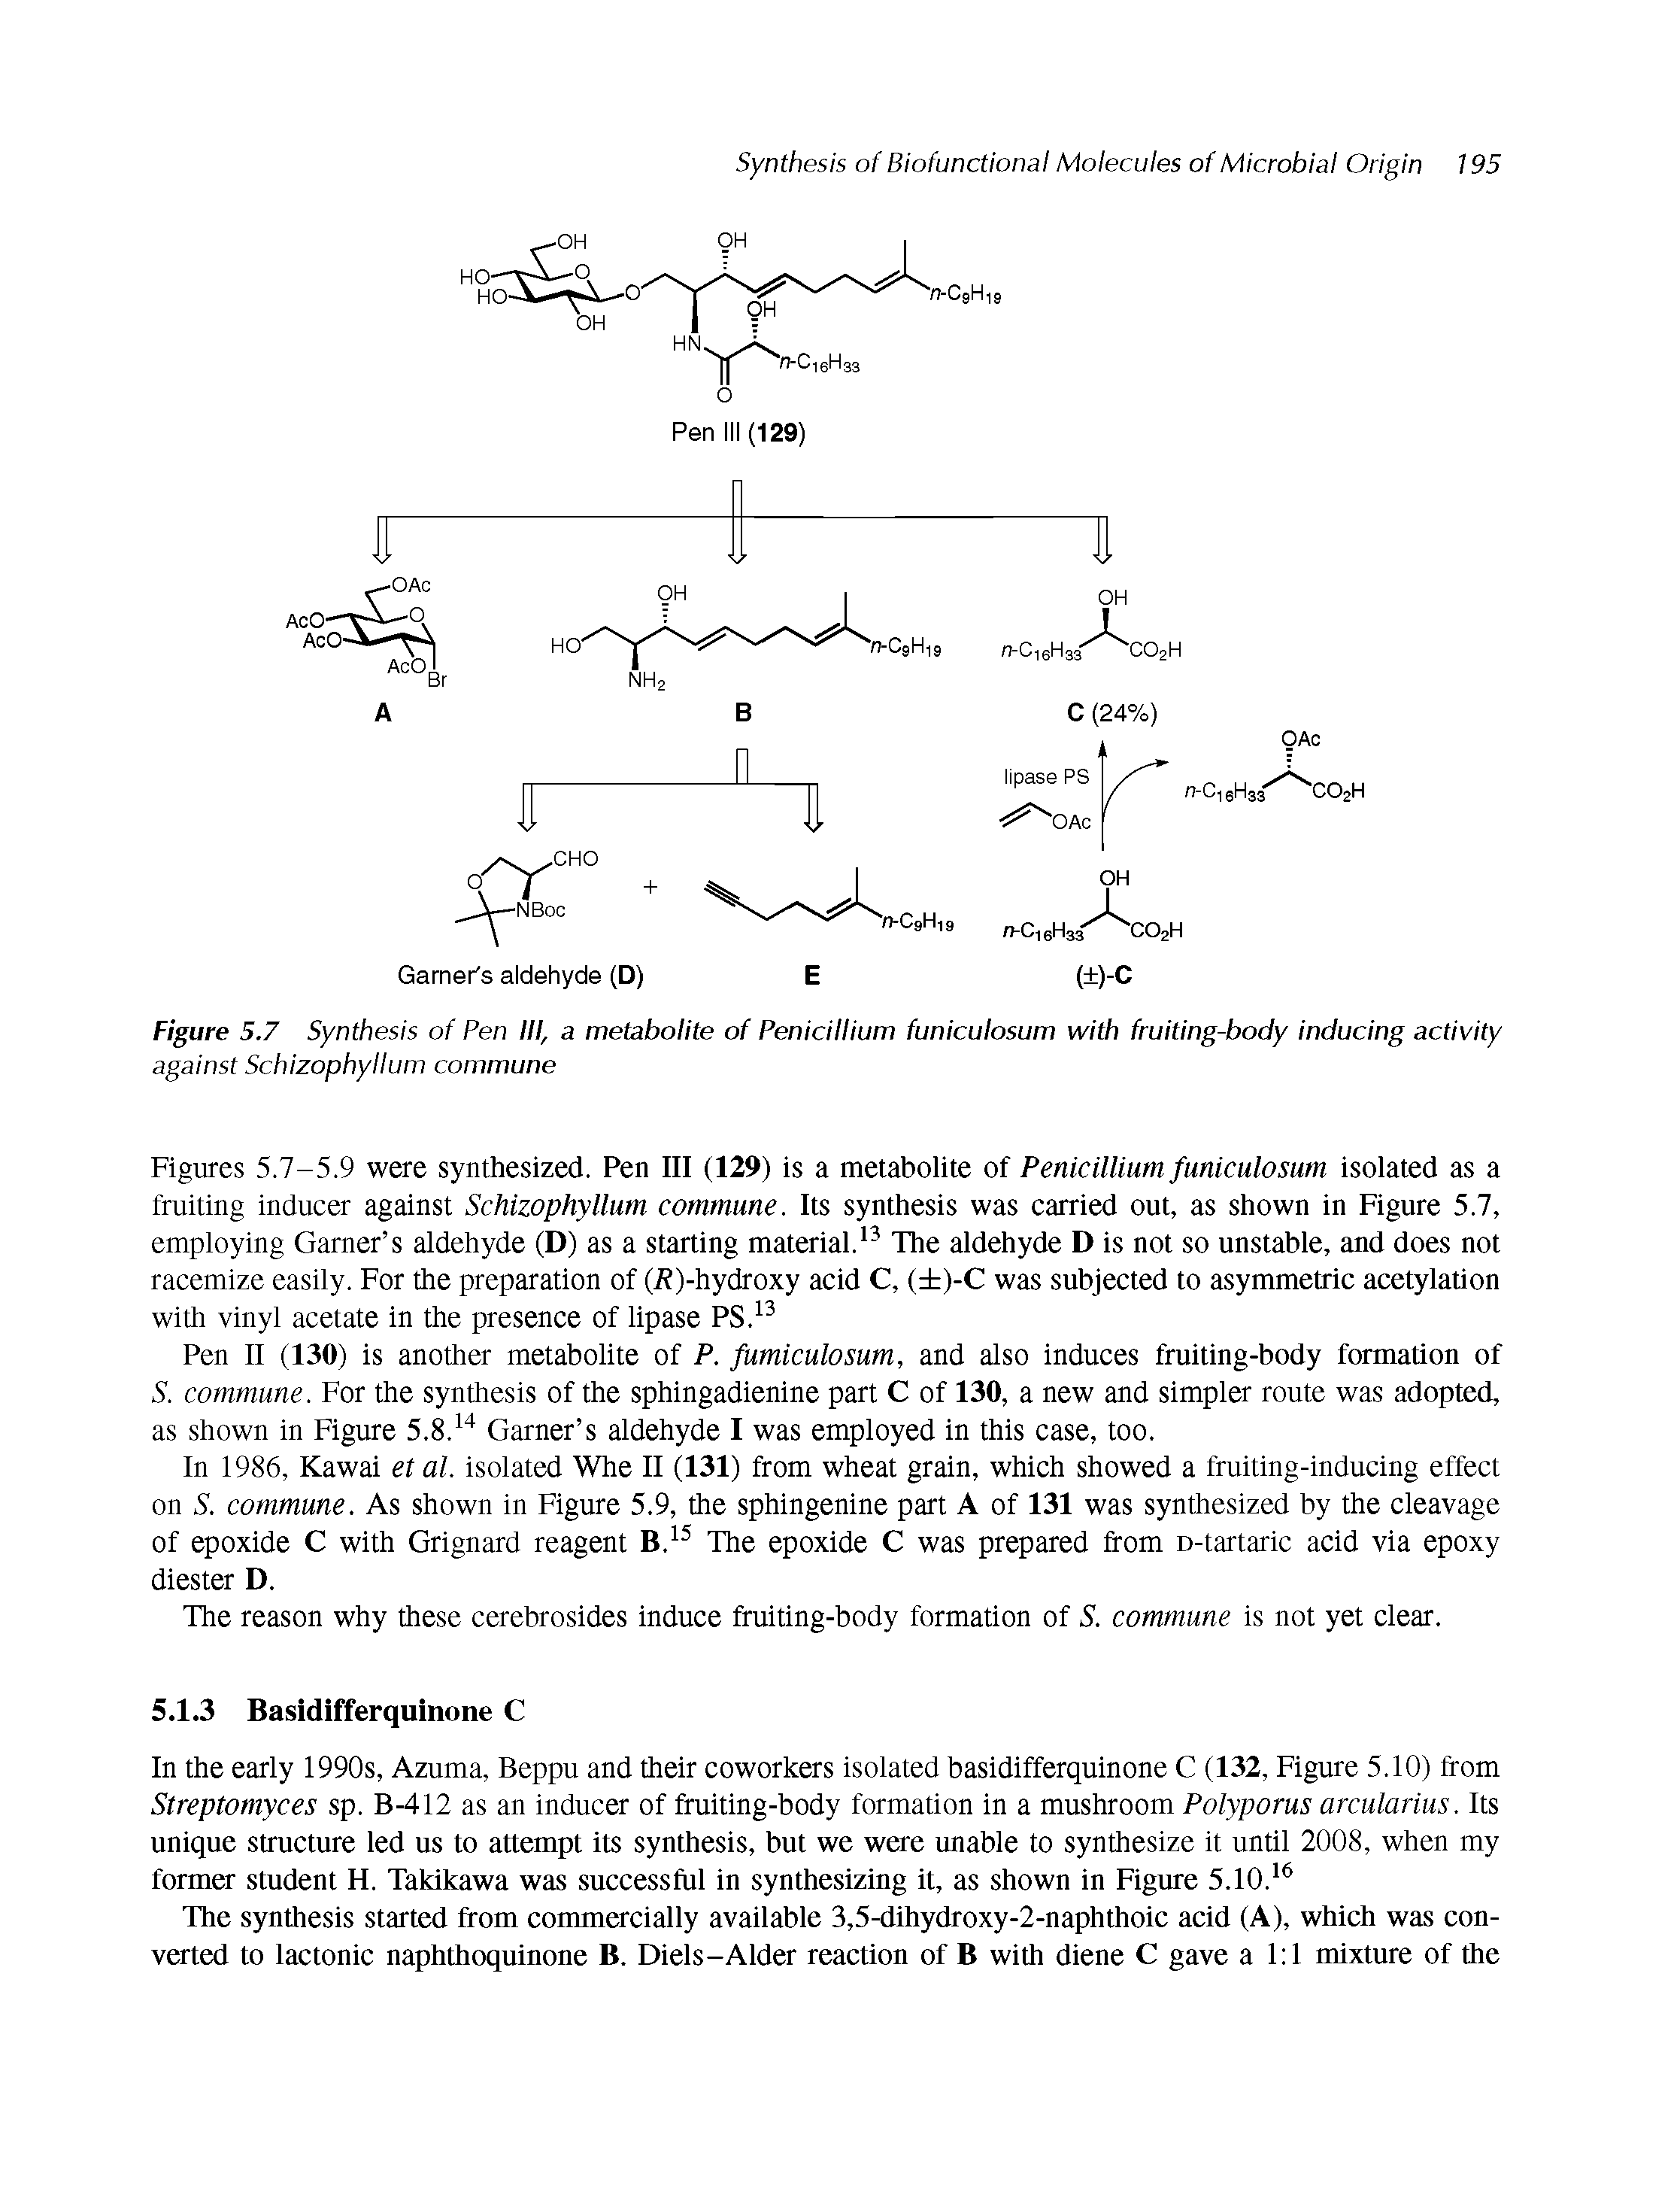 Figures 5.7-5.9 were synthesized. Pen III (129) is a metabolite of Penicillium funiculosum isolated as a fruiting inducer against Schizophyllum commune. Its synthesis was carried out, as shown in Figure 5.7, employing Garner s aldehyde (D) as a starting material.13 The aldehyde D is not so unstable, and does not racemize easily. For the preparation of (-R)-hydroxy acid C, ( )-C was subjected to asymmetric acetylation with vinyl acetate in the presence of lipase PS.13...